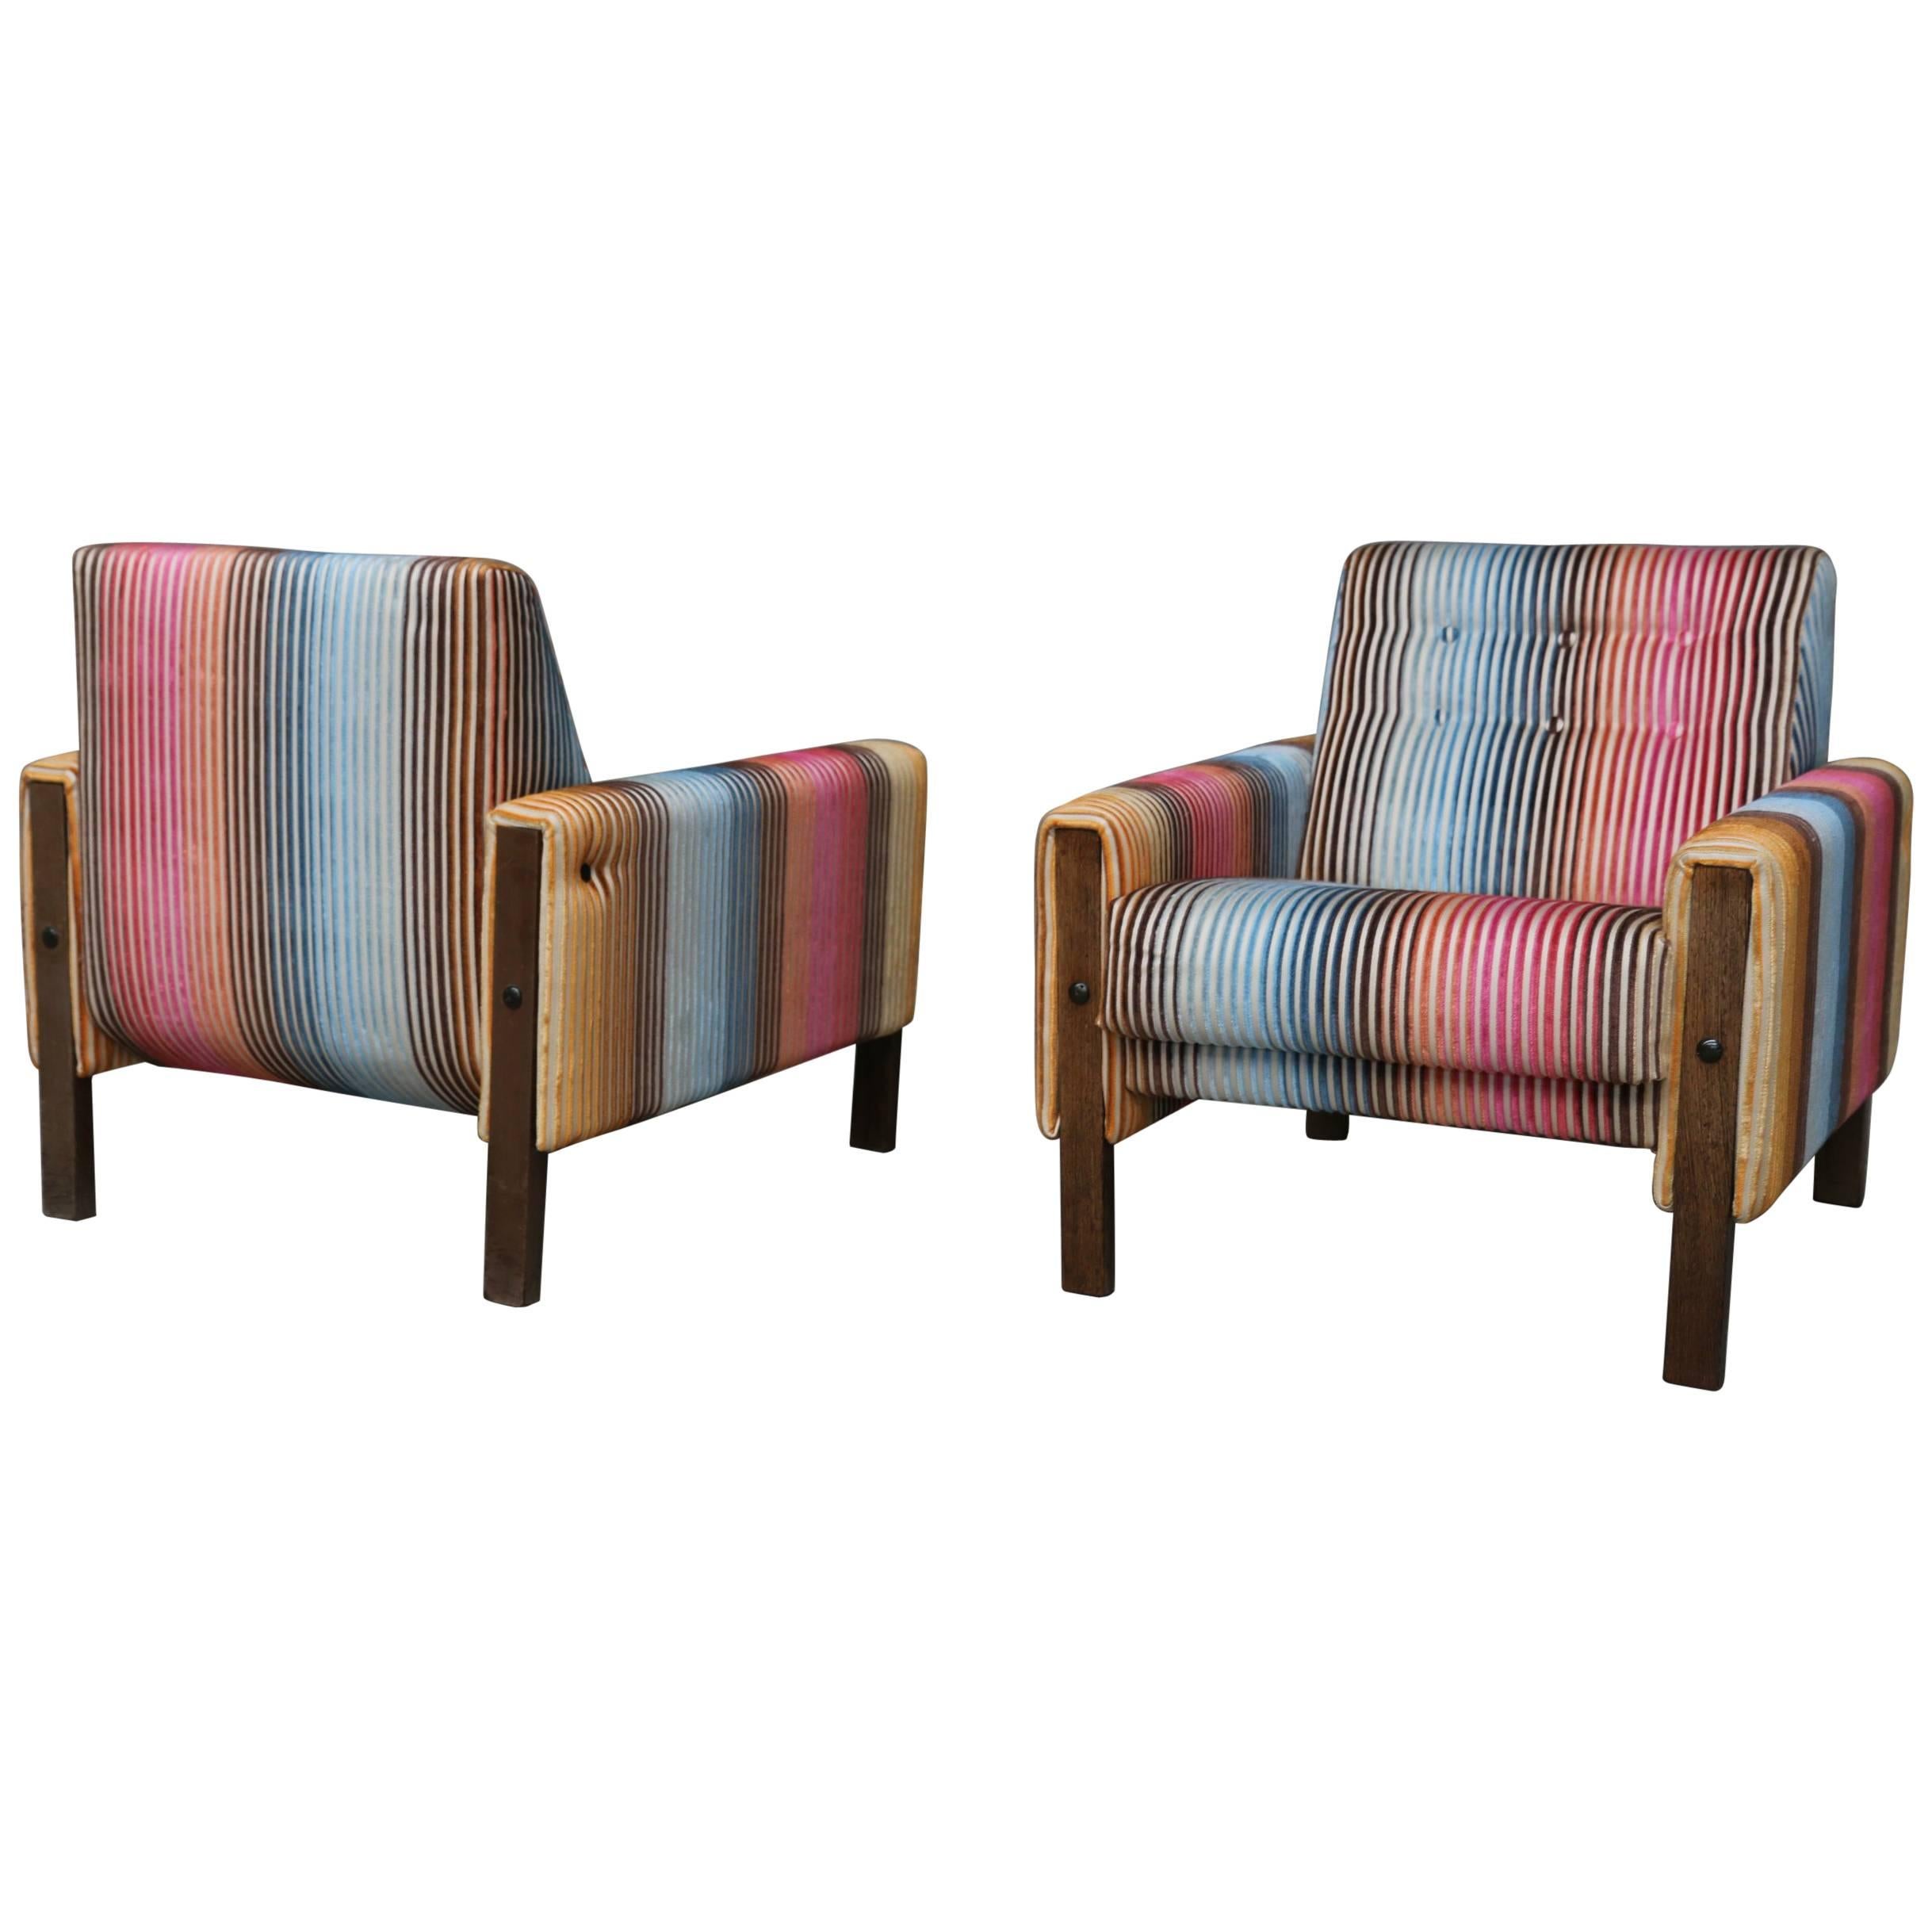 1950s Lounge Armchairs Re-Upholstered in Multicolored Missoni Fabric